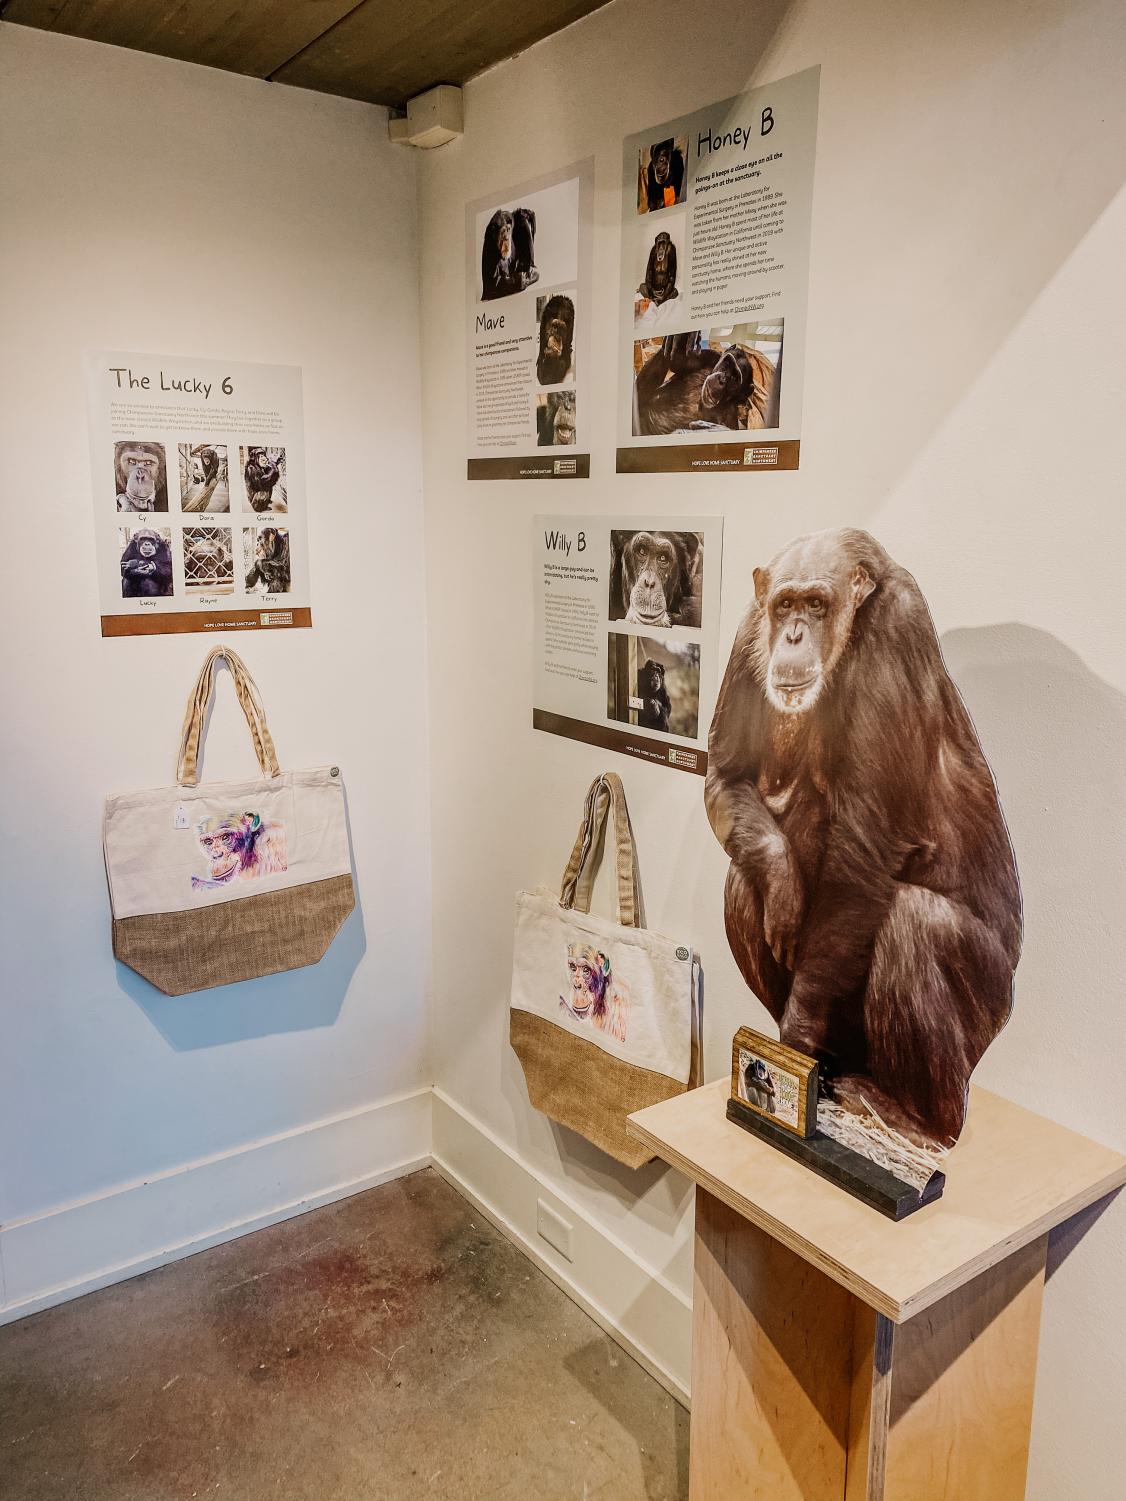 Primate+Awareness+Network+club+co-hosts+fundraiser+with+Gallery+One